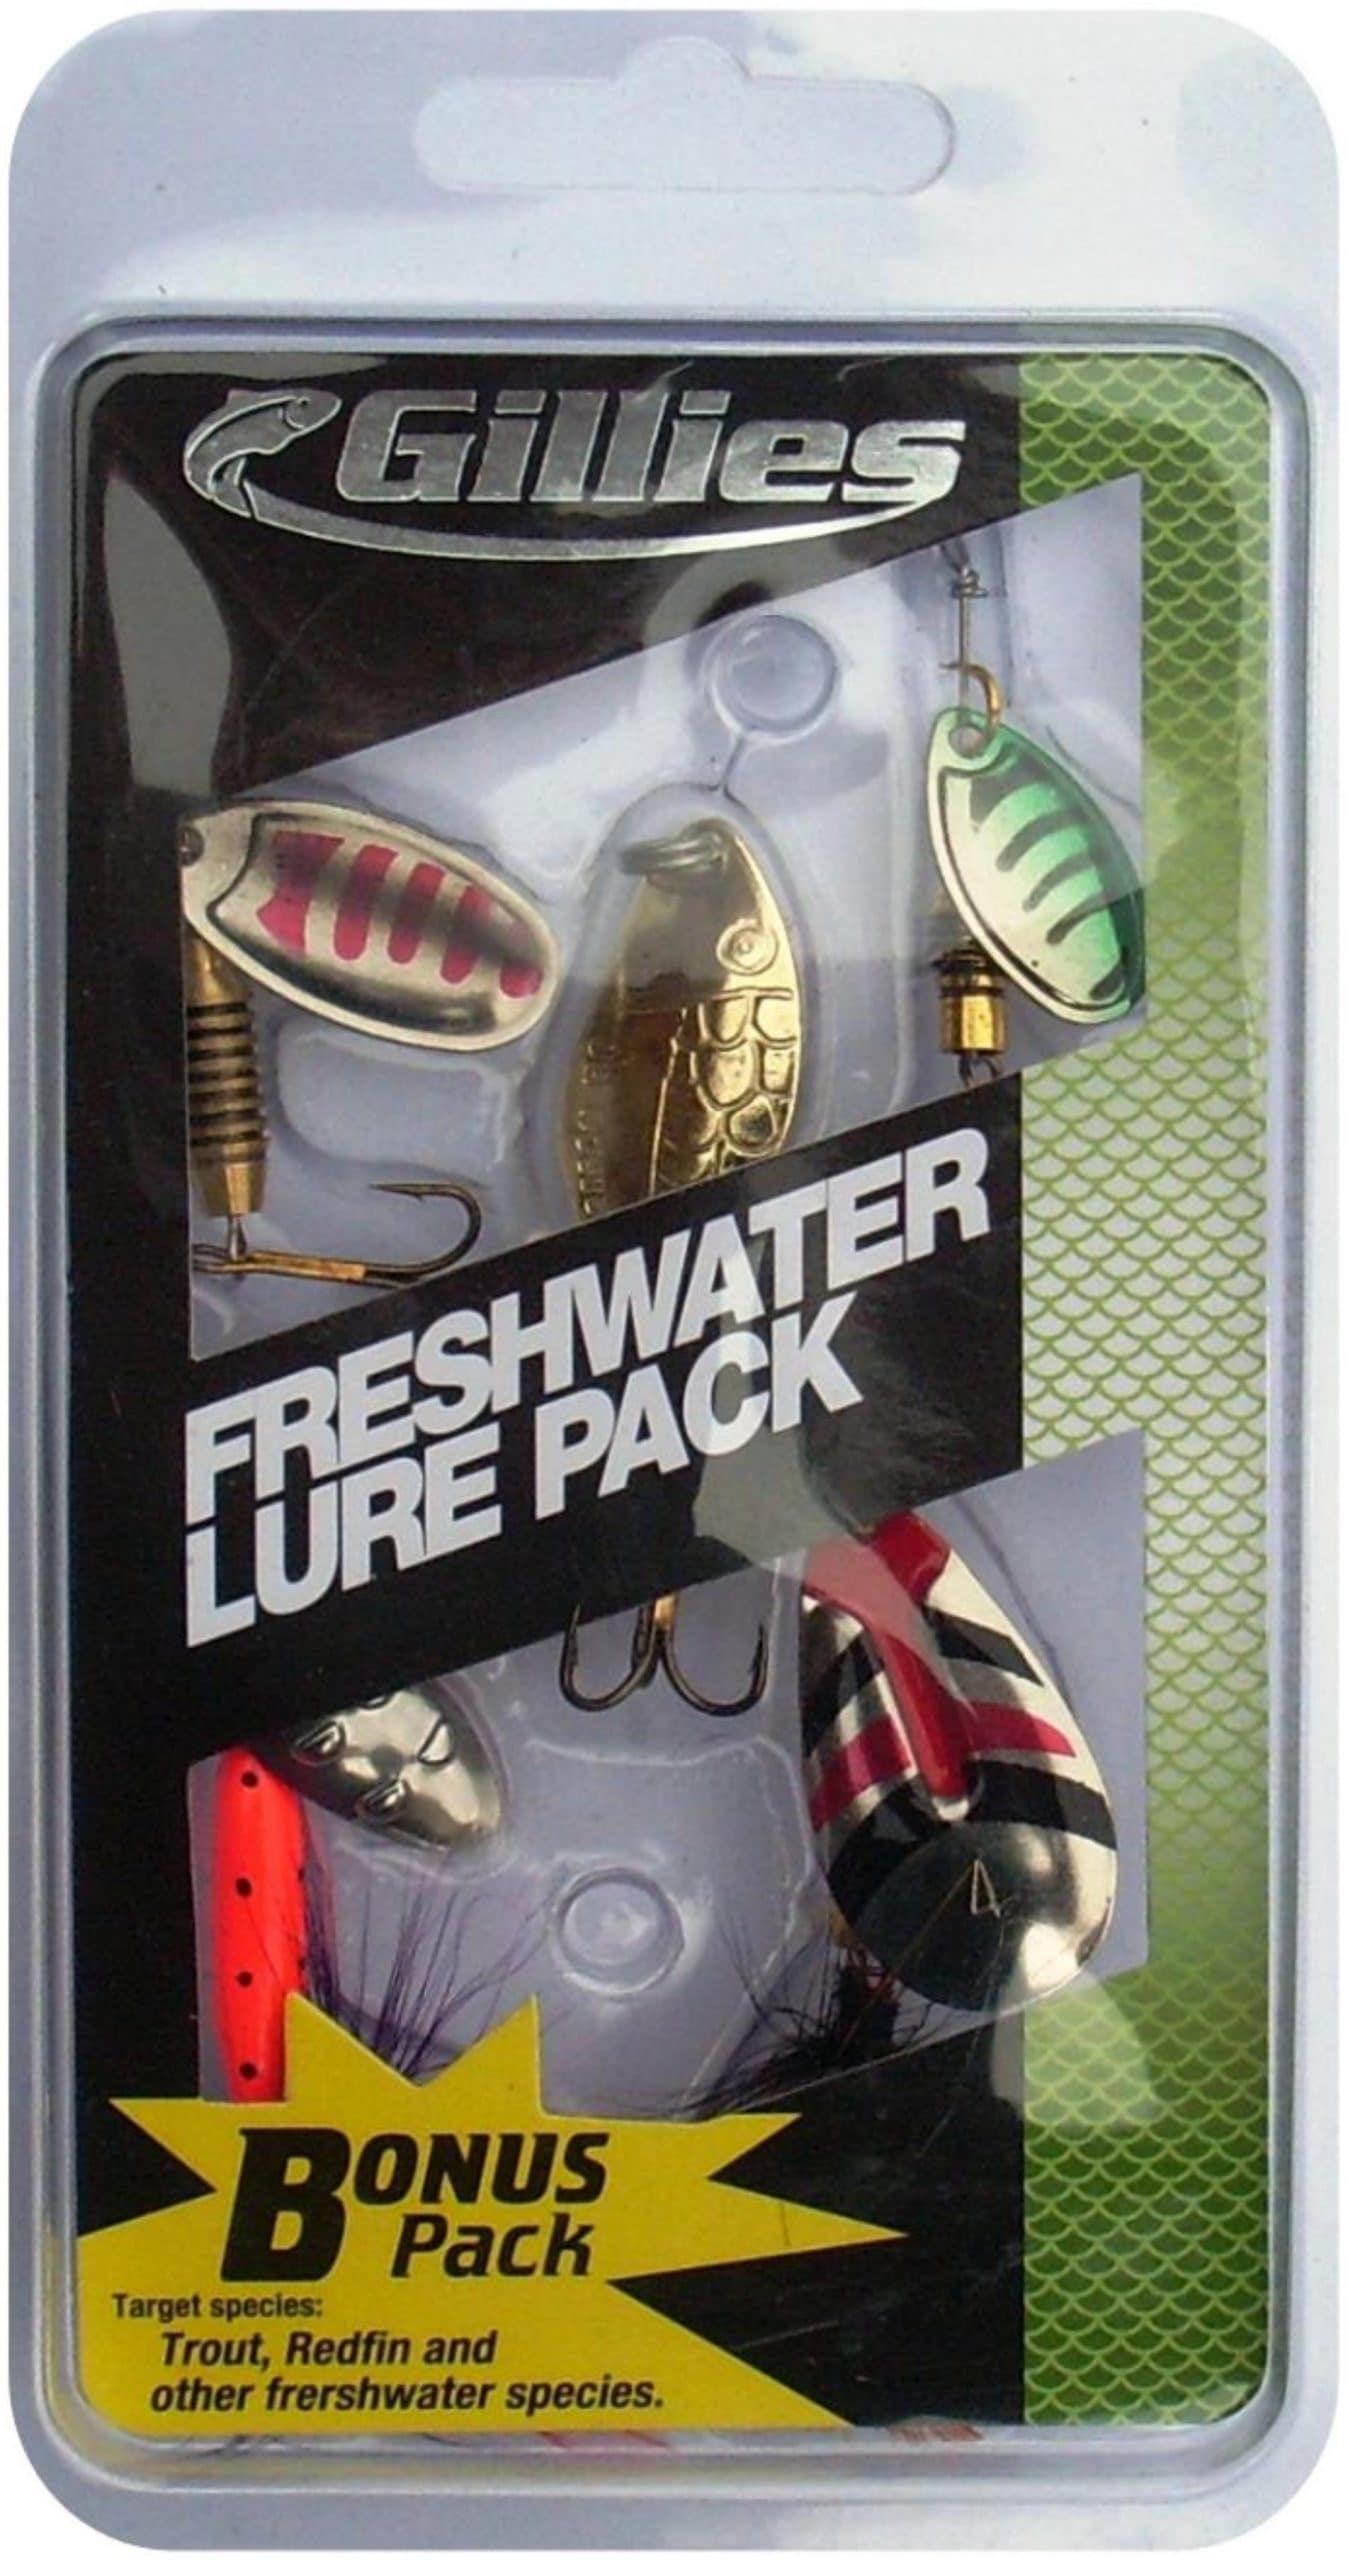 GILLIES FRESHWATER LURE PACK - JM Gillies